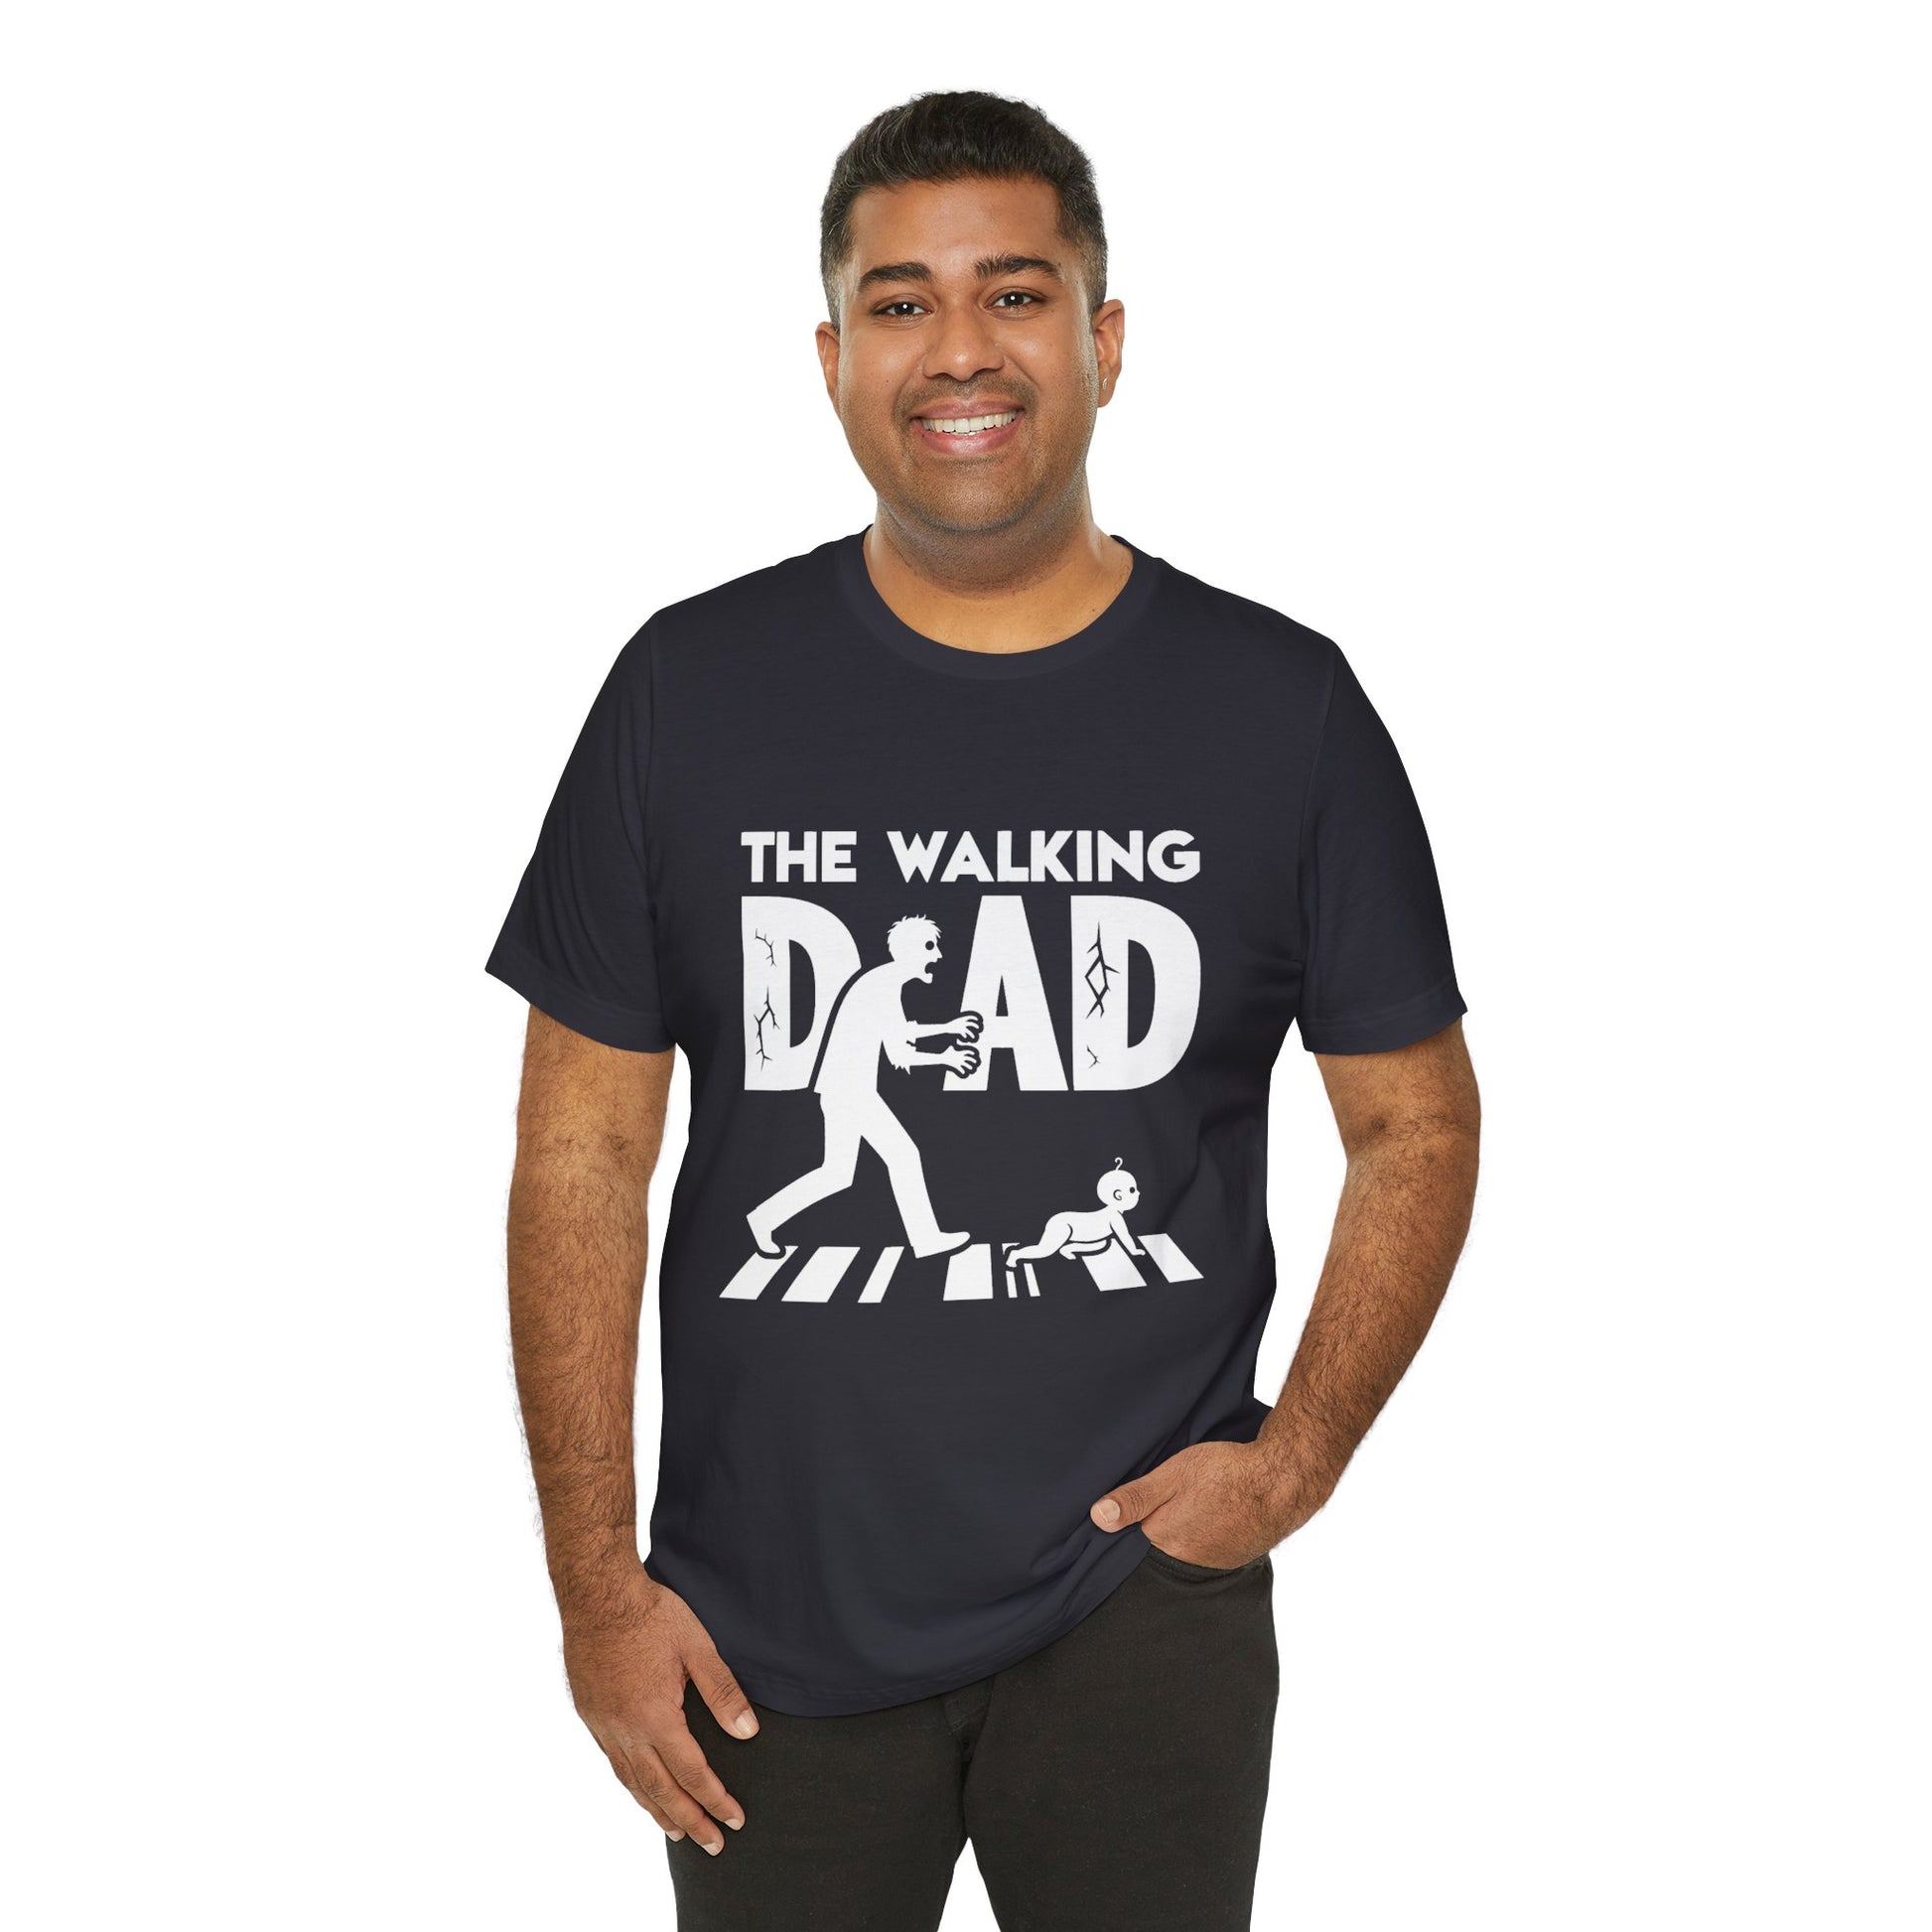 The Walking DAD |  Funny Unisex Short Sleeve Tee | Funny Movie TV Show Shirt | DAD Shirt | The walking dead fanmade t-shirt - CrazyTomTShirts